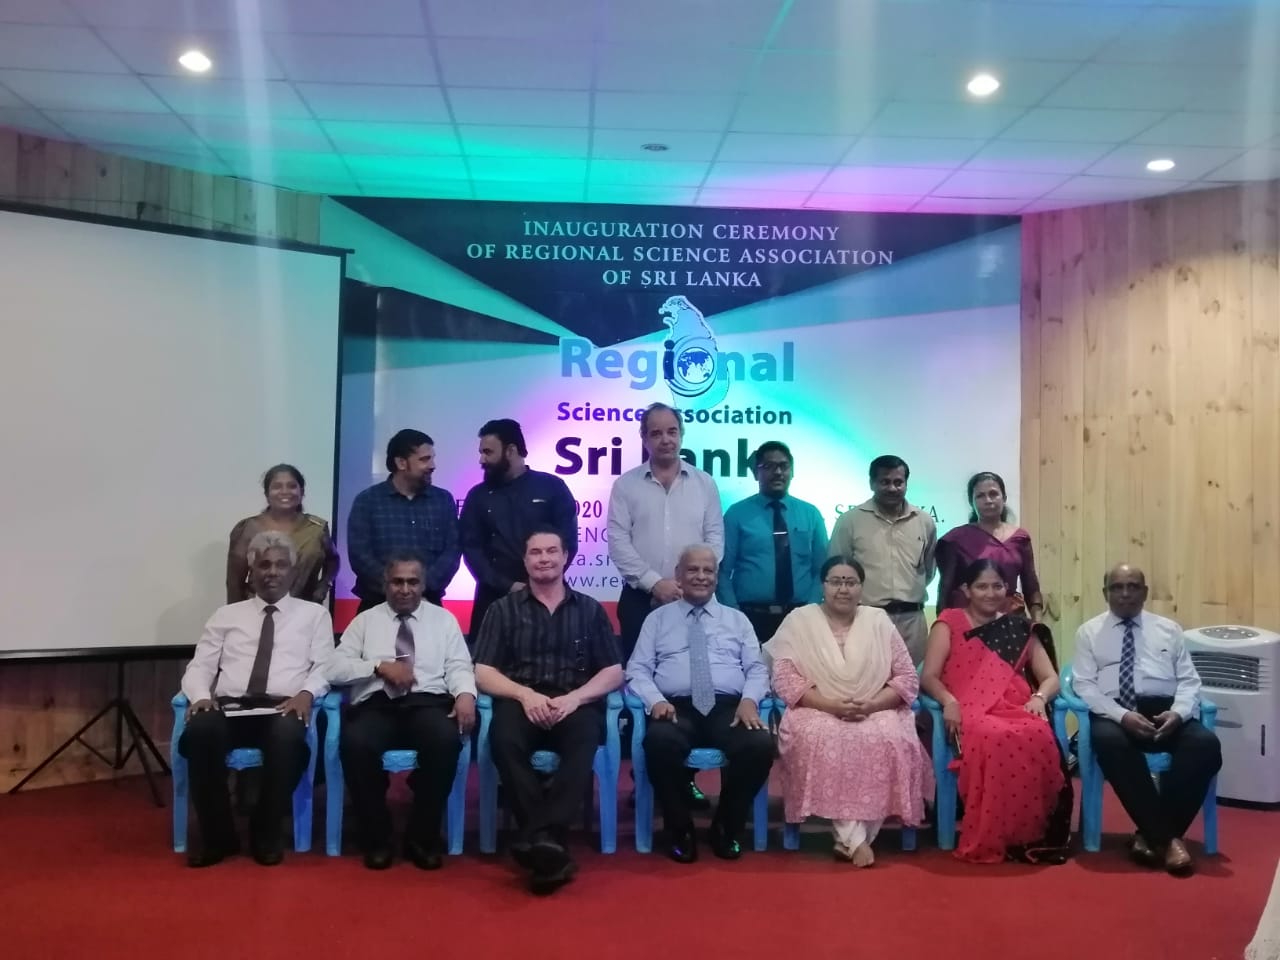 Inauguration of the Sri Lanka Section of Regional Science